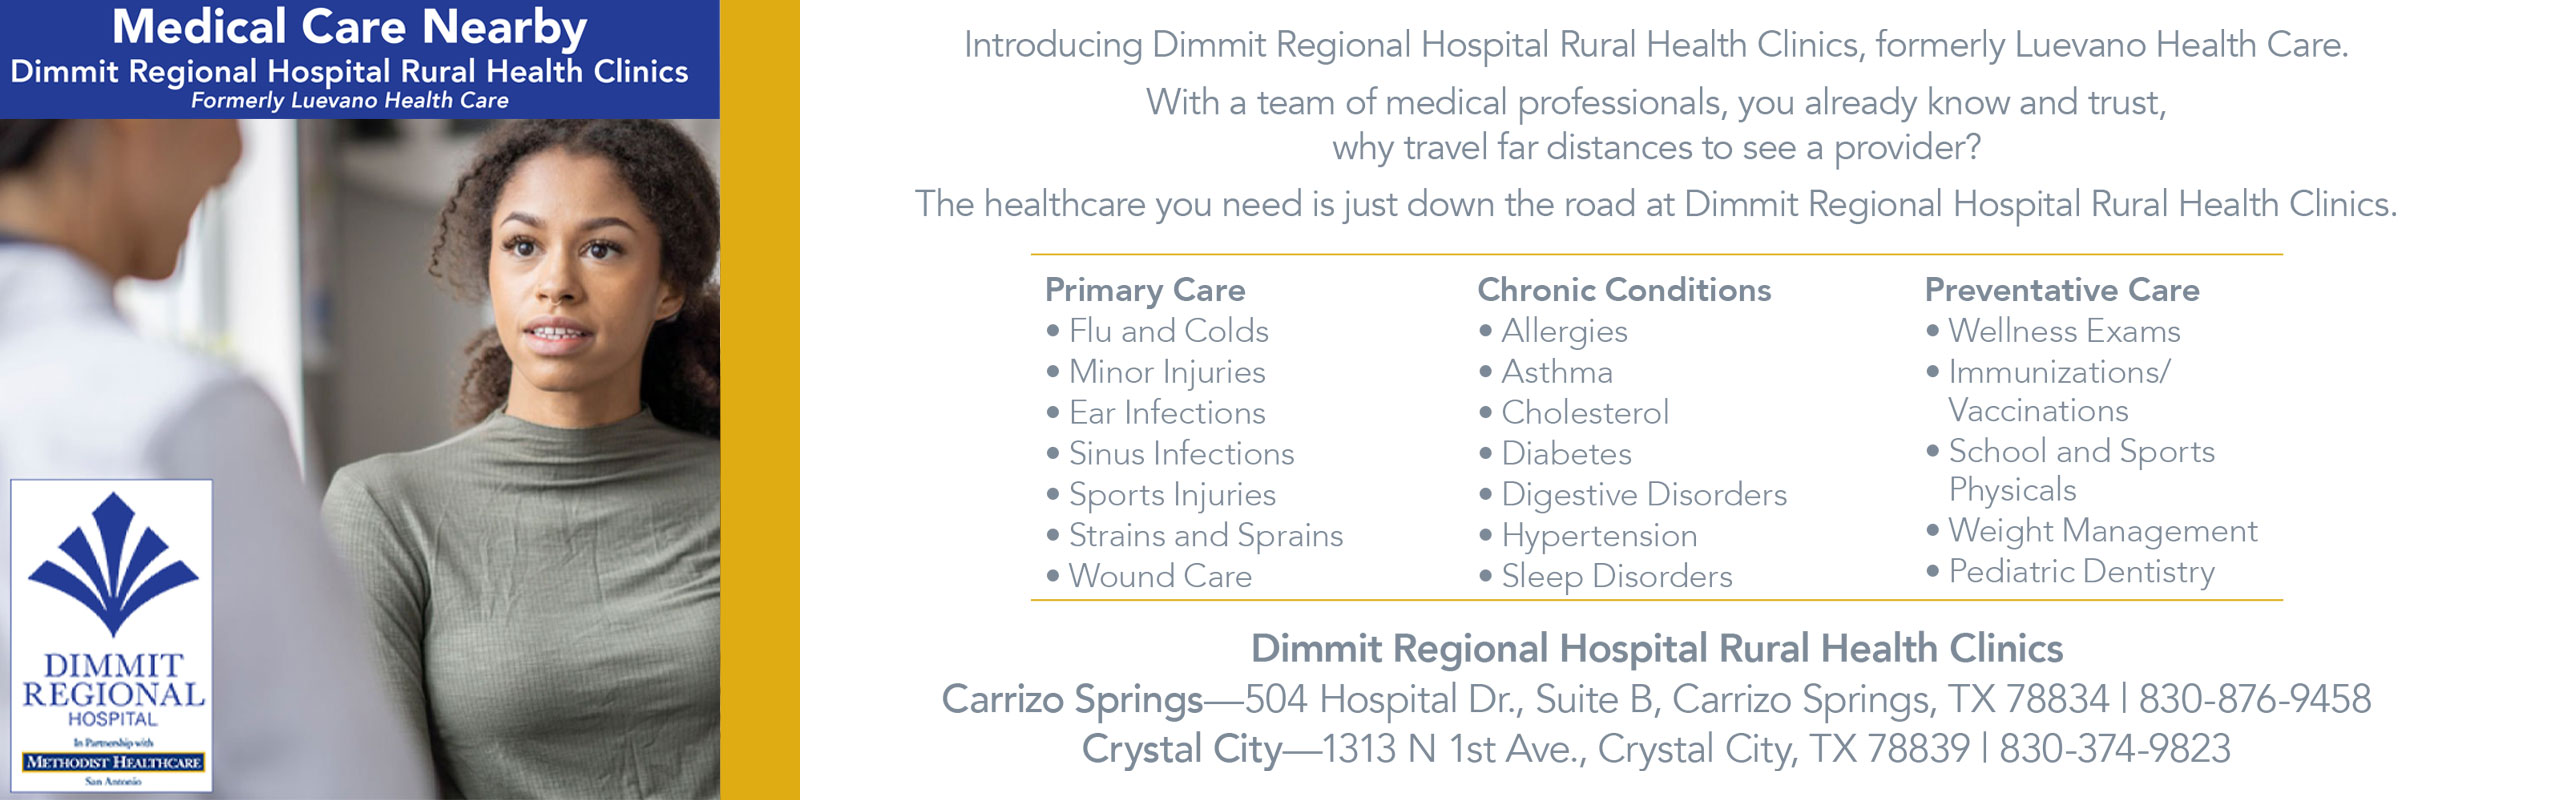 Medical Care Nearby
Dimmit Regional Hospital Rural Health Clinics
Formerly Luevano Health Care

Introducing Dimmit Regional Hospital Rural Health Clinics, formerly Luevano Health Care. With a team of medical professionals, you already know and trust, why travel far distances to see a provider?
The Healthcare you need is just down the road at Dimmit Regional Hospital Rural Health Clinics.

Primary Care- Flu and Colds, Minor Injuries, Ear Infections, Sinus infections, Sports Injuries, Strains and Sprains, and Wound Care
Chronic Conditions- Allergies, Asthma, Cholesterol, Diabetes, Digestive Disorders, Hypertension, & Sleep Disorders
Preventative Care- Wellness Exams, Immunizations/Vaccinations, Scool and Sports Physical, Weight Management, and Pediatric Dentistry 

Dimmit Regional Hospital Rural Health Clinics

Carrizo Springs
504 Hospital Dr. Suite B
Carrizo Springs, TX 78834
830-876-9458

Crystal City
1313 N 1st Ave.
Crystal City, TX 78839
830-876-94-58